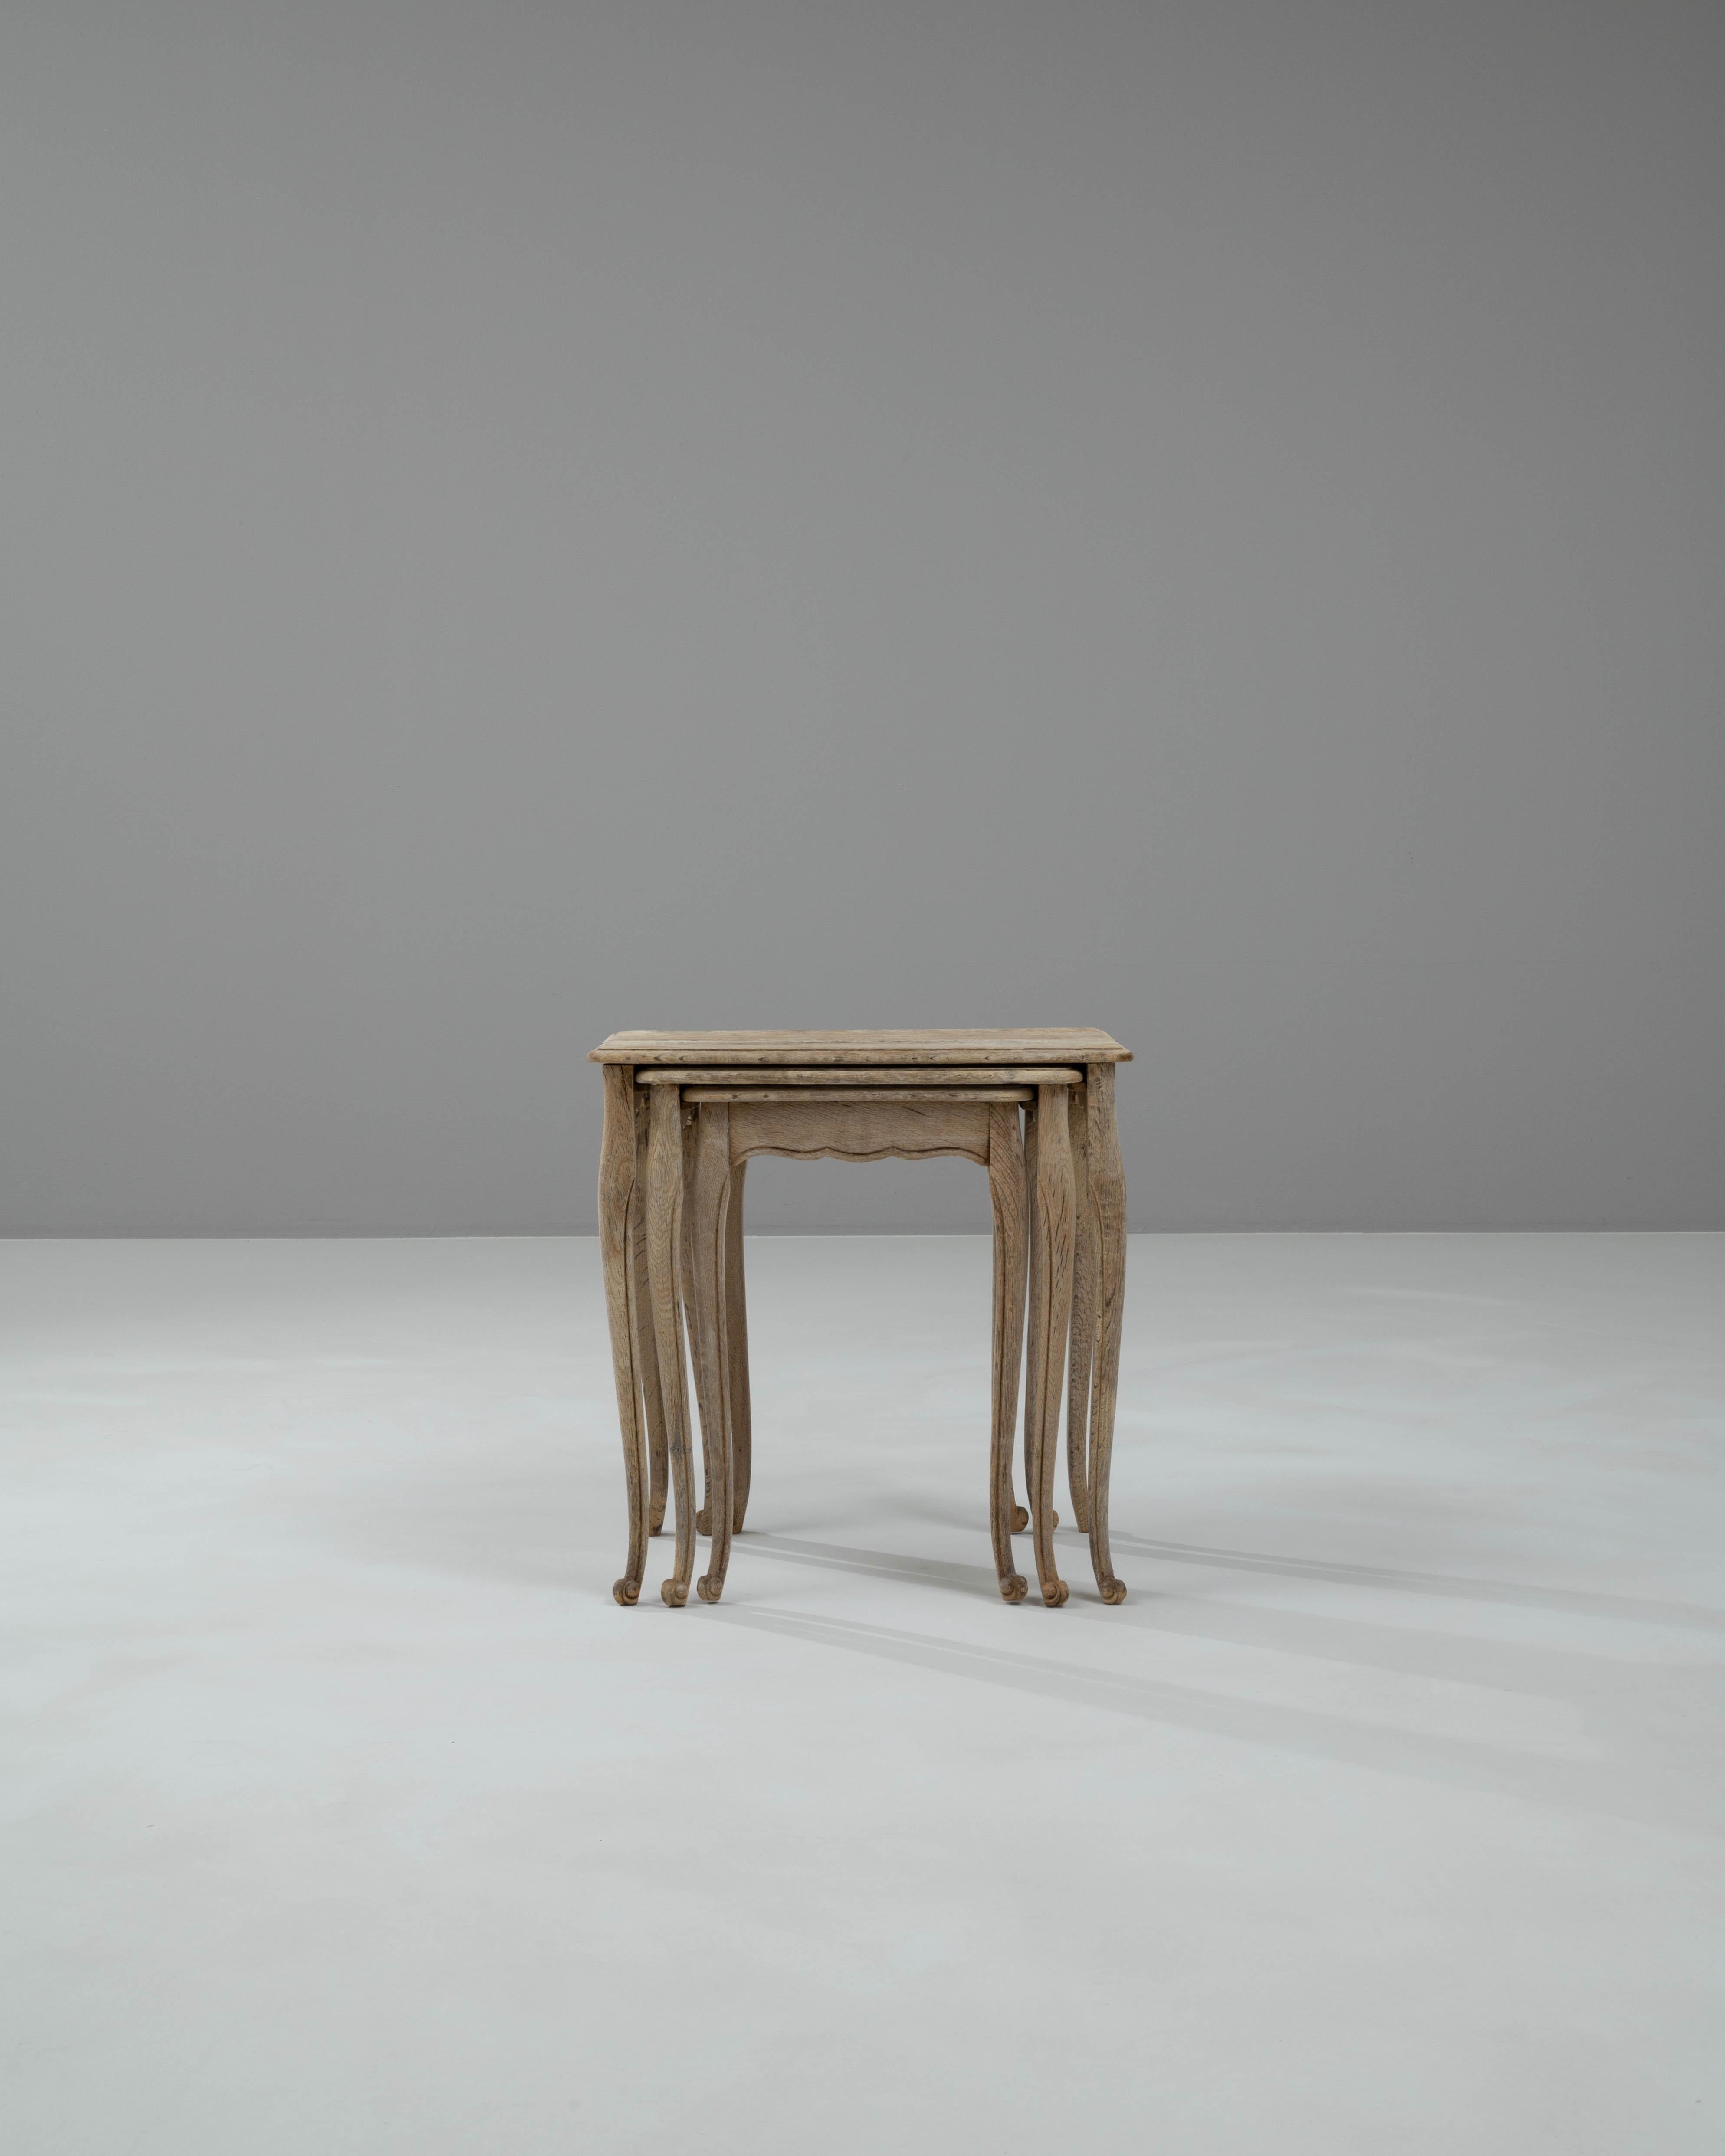 Introducing a delightful trio of 20th-century Belgian bleached oak nesting tables, each uniquely designed to offer both style and functionality in your living space. These charming tables are crafted with fine attention to detail, featuring